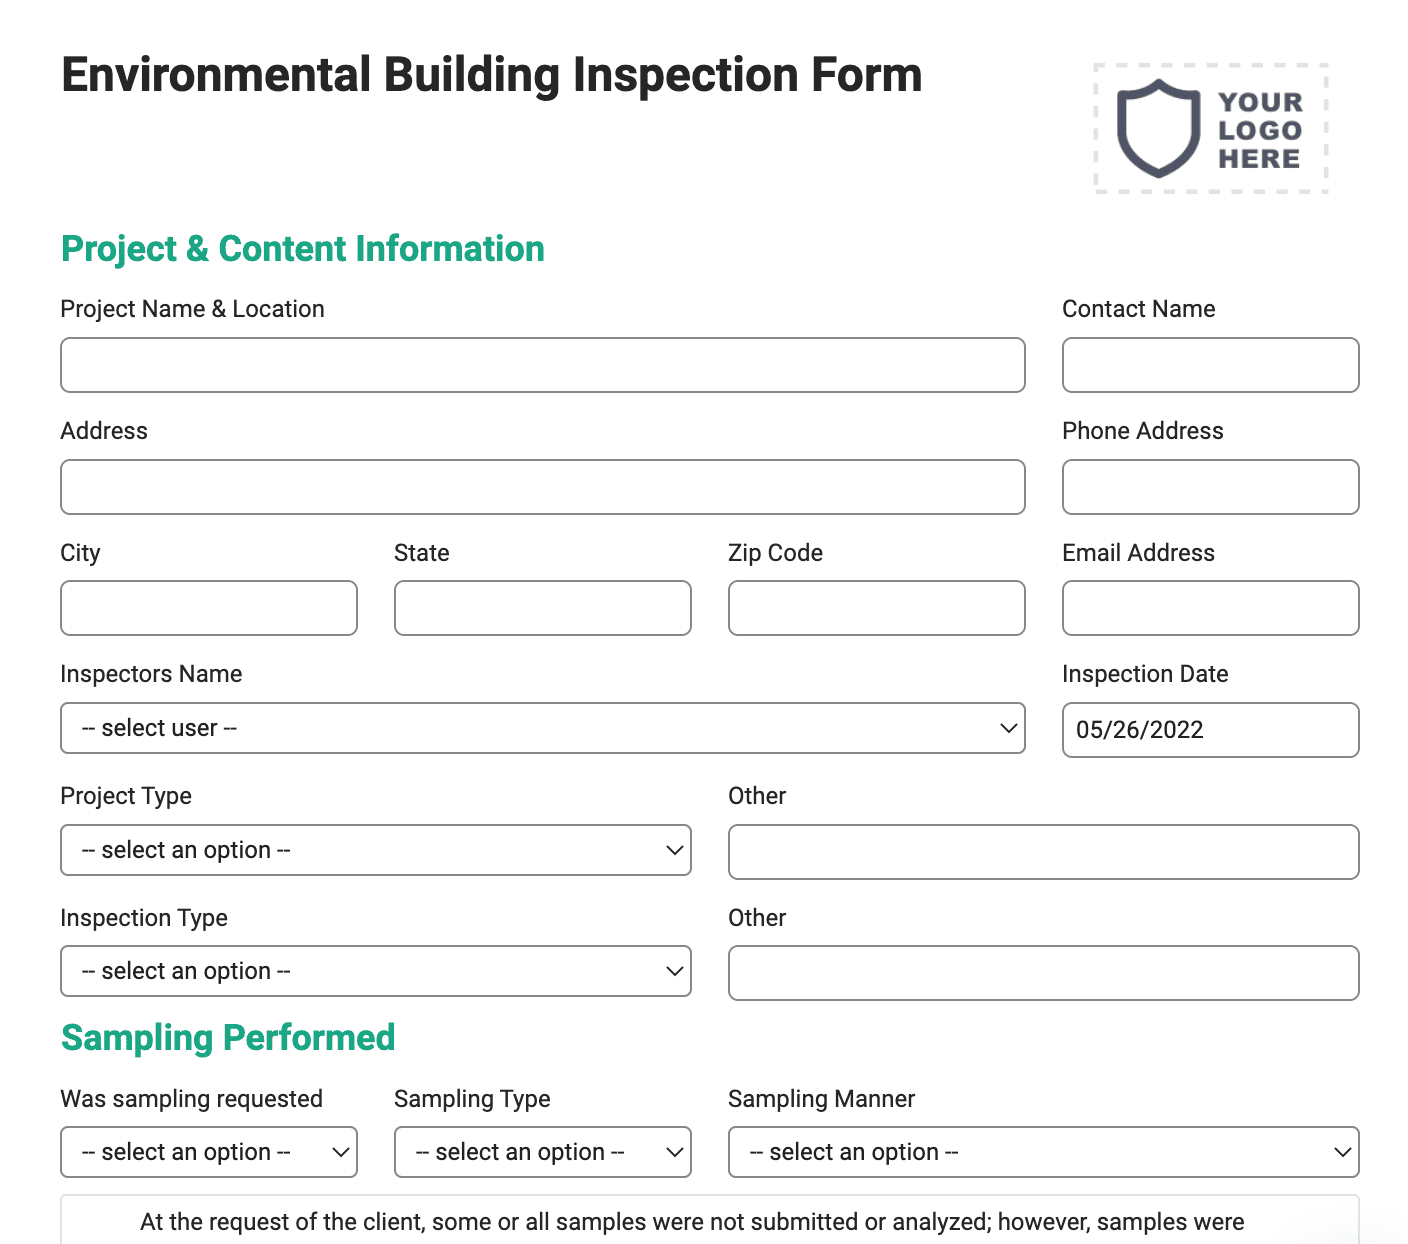 Lead Environmental Building Inspection Testing Form